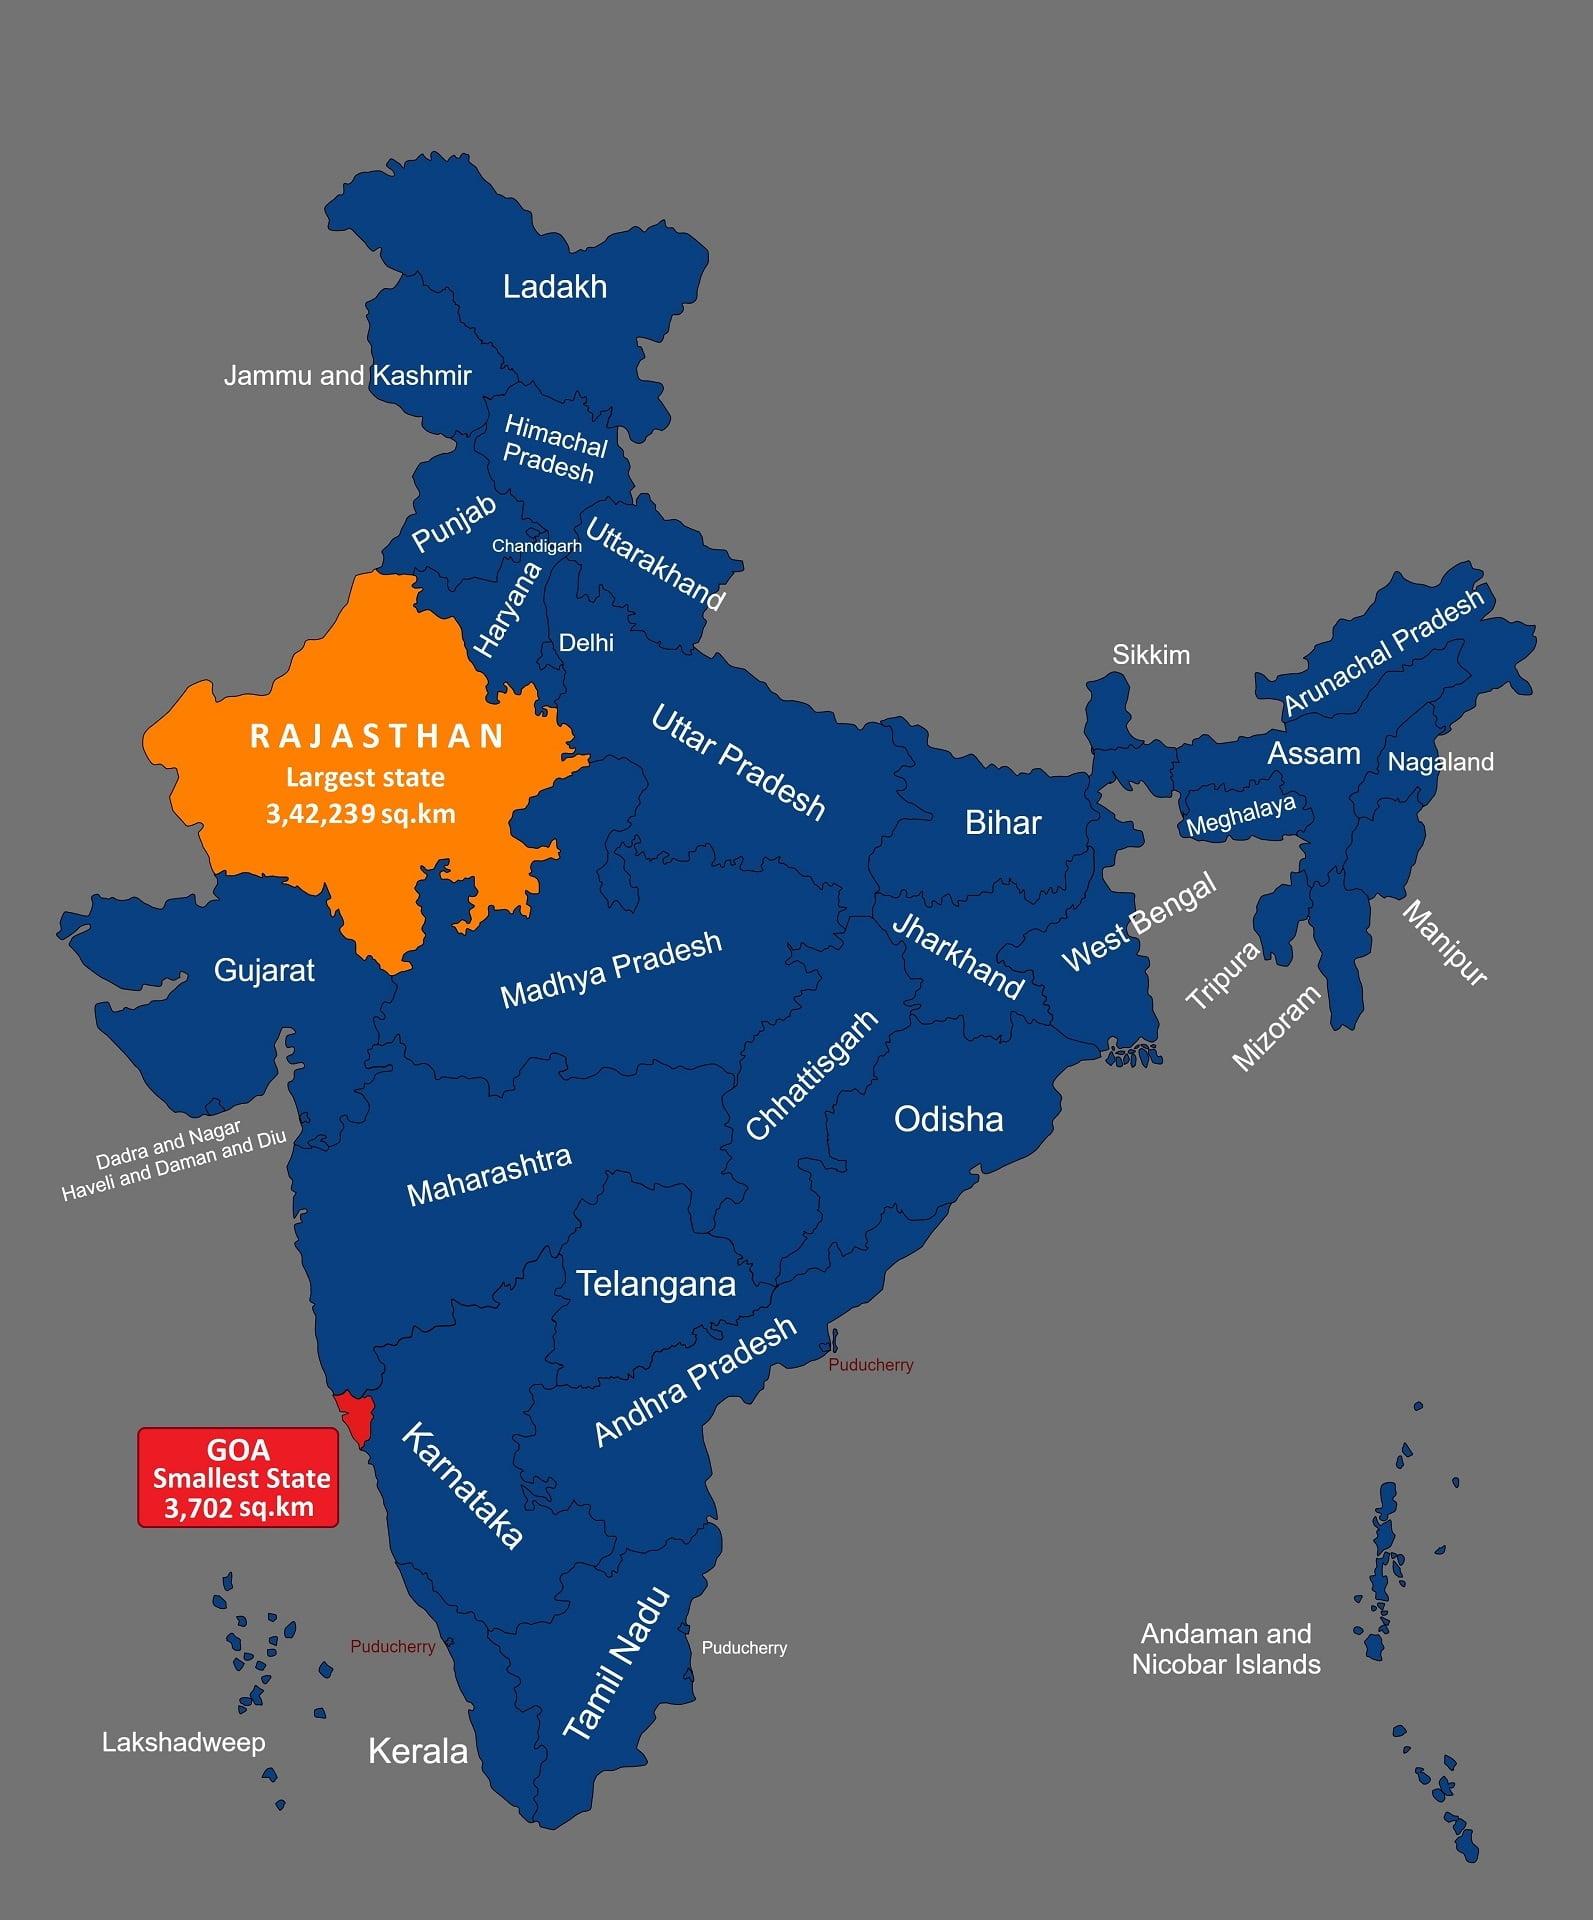 India's largest state in terms of area and population_40.1